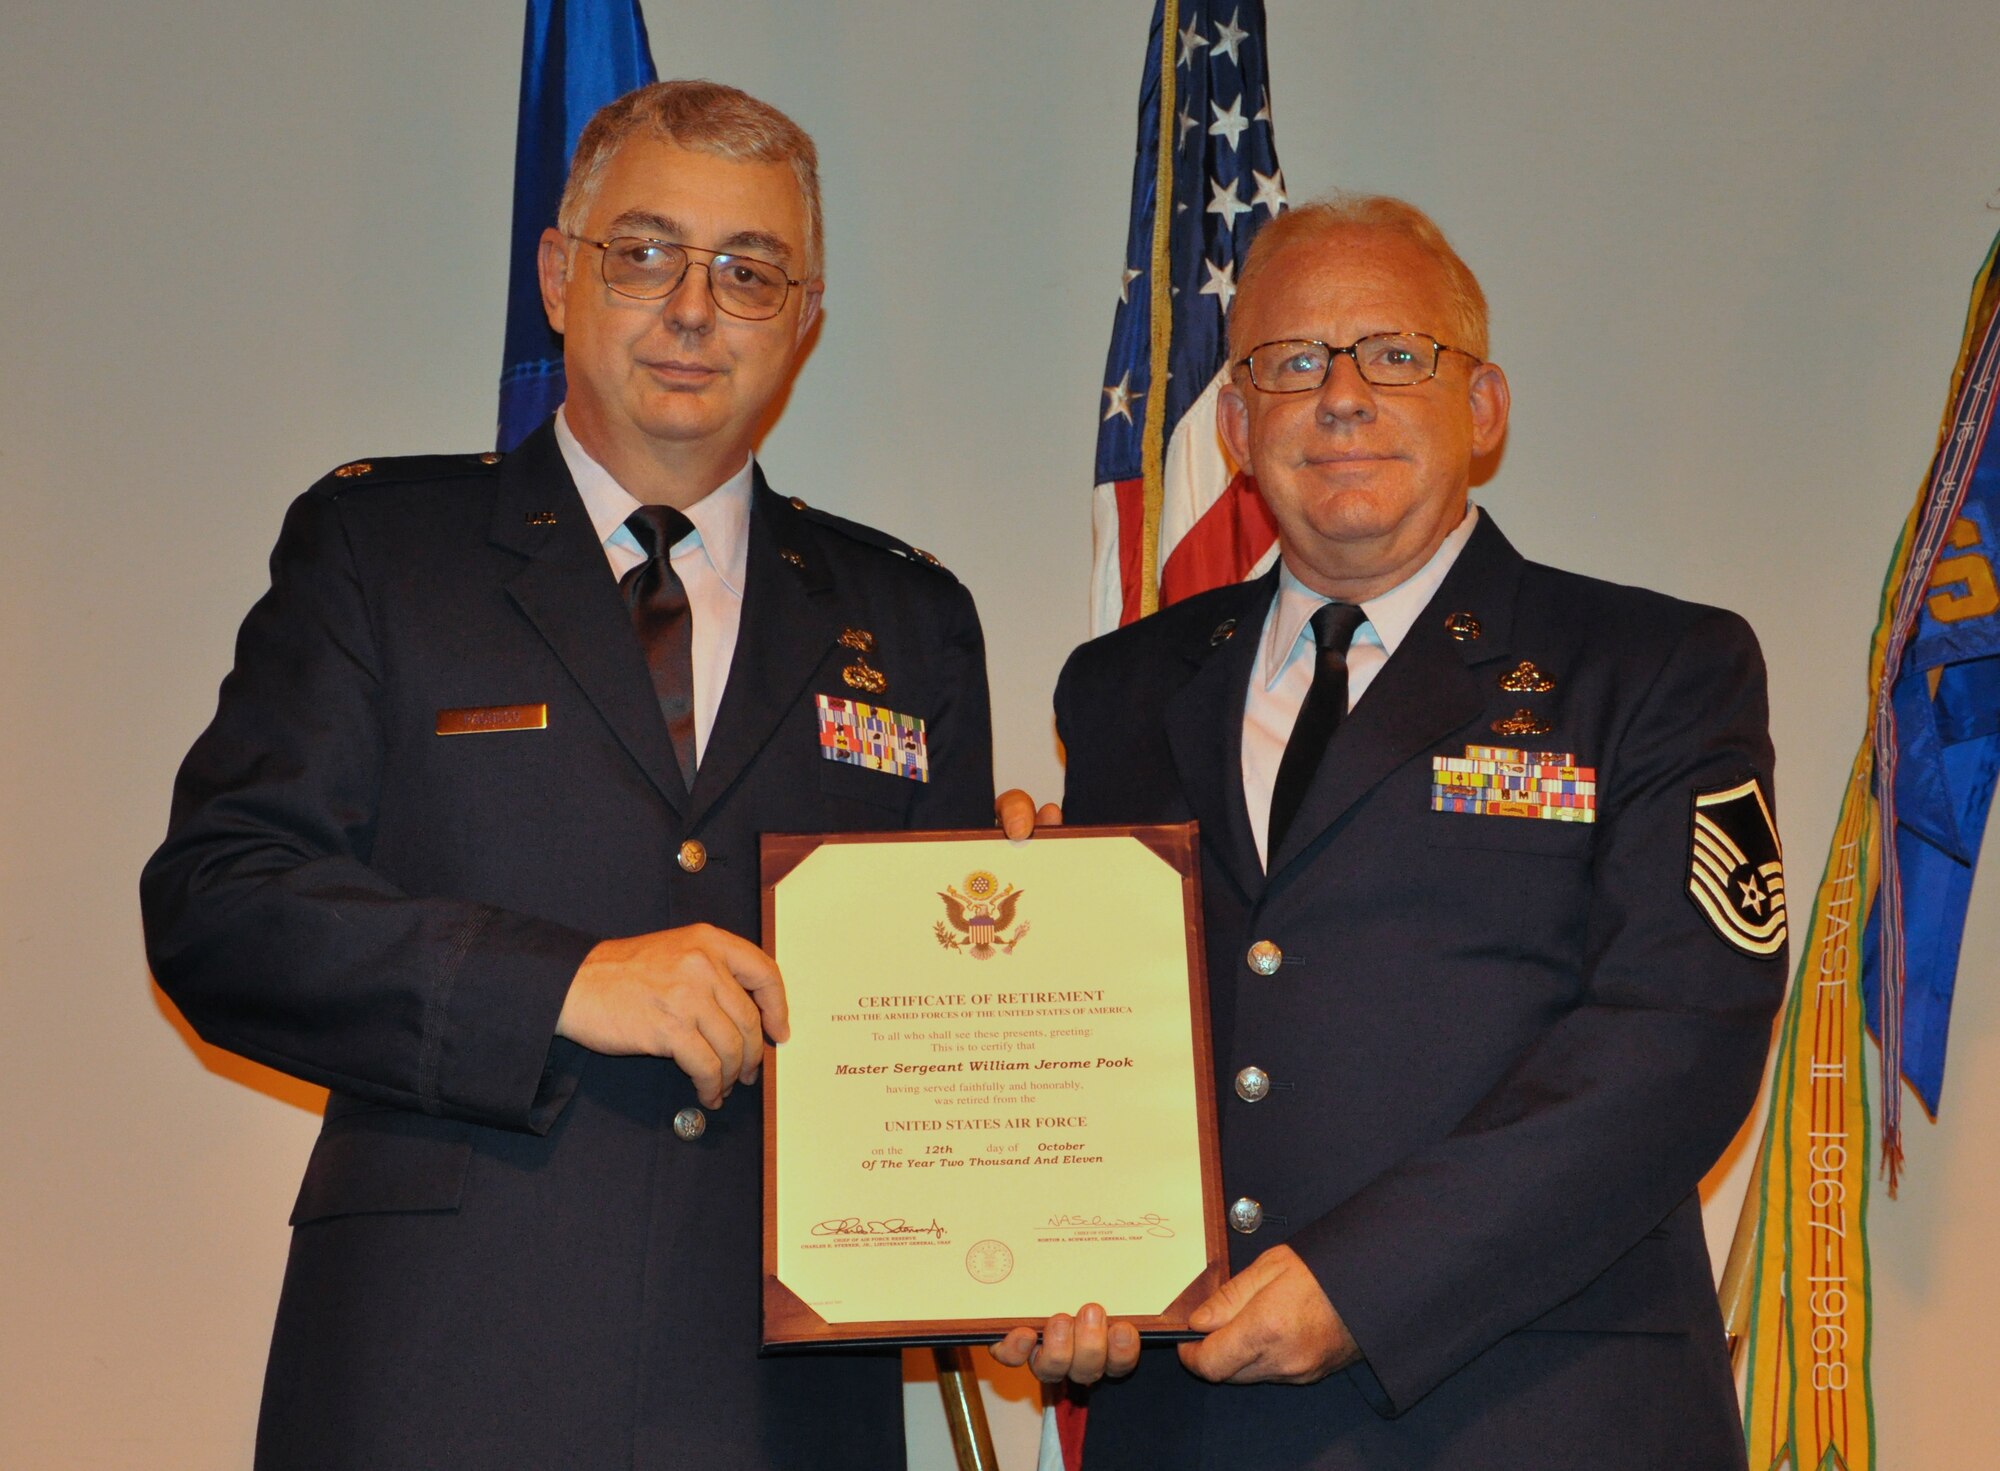 Retired Lt. Col. Daniel Pacheco (left) presents Master Sgt. William Pook, a reservist assigned to the 633rd Civil Engineer Squadron, with his certificate of retirement in a ceremony at the squadron’s Emergency Management flight warehouse at Langley Air Force Base, Va., Sept. 23, 2011. Pacheco, who officiated the retirement ceremony, met Pook in basic military training in 1971, and has never lost touch with him. (U.S. Air Force photo by Senior Airman Jason J. Brown/Released)